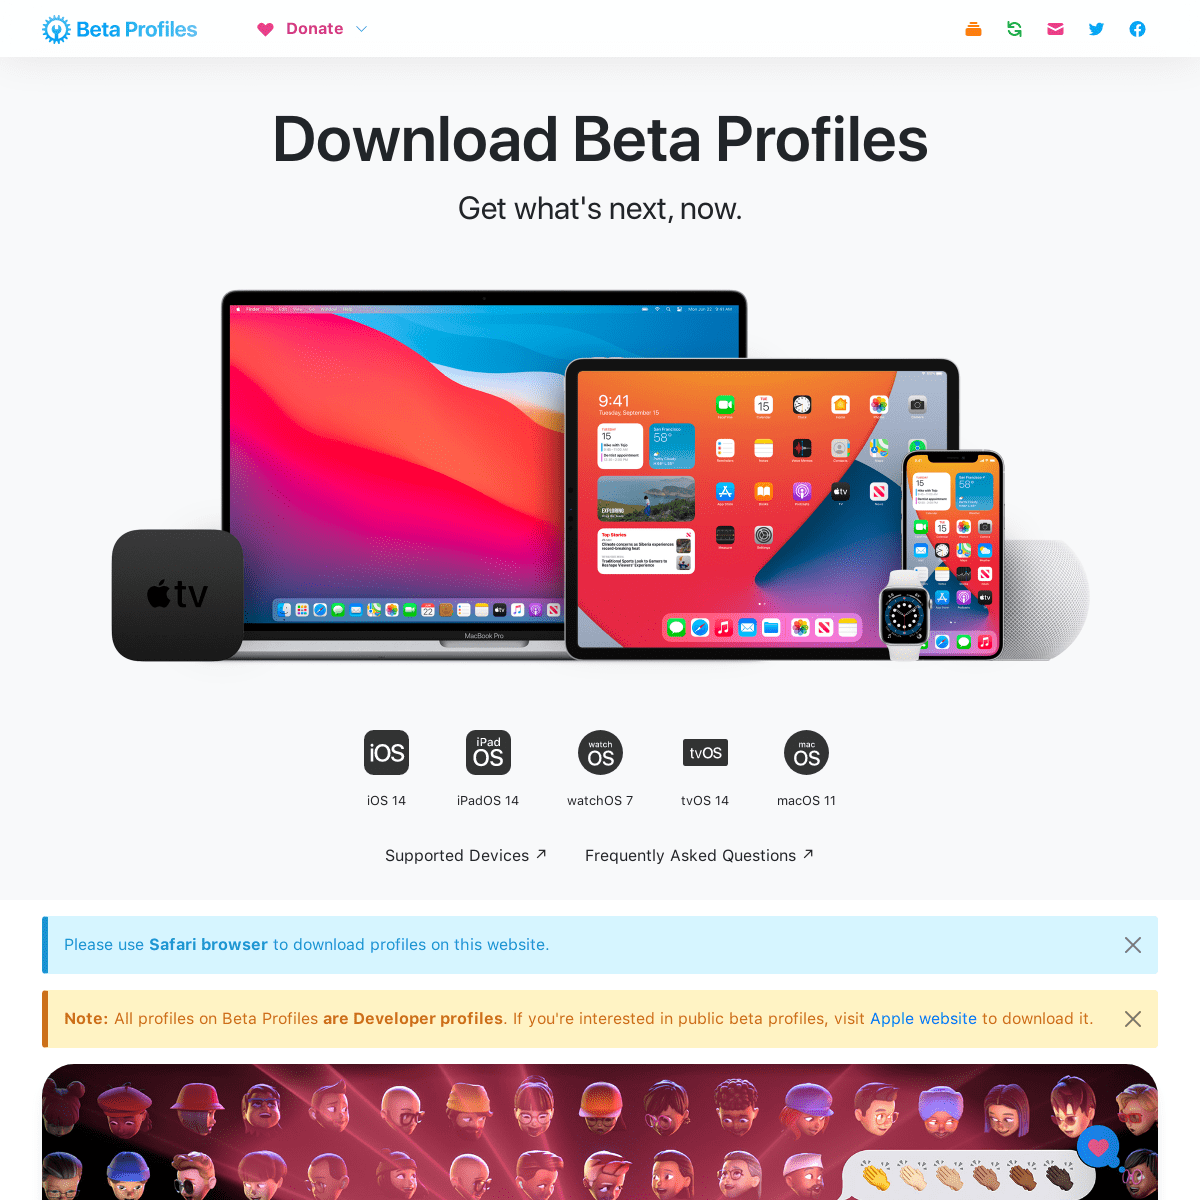 A complete backup of https://betaprofiles.com